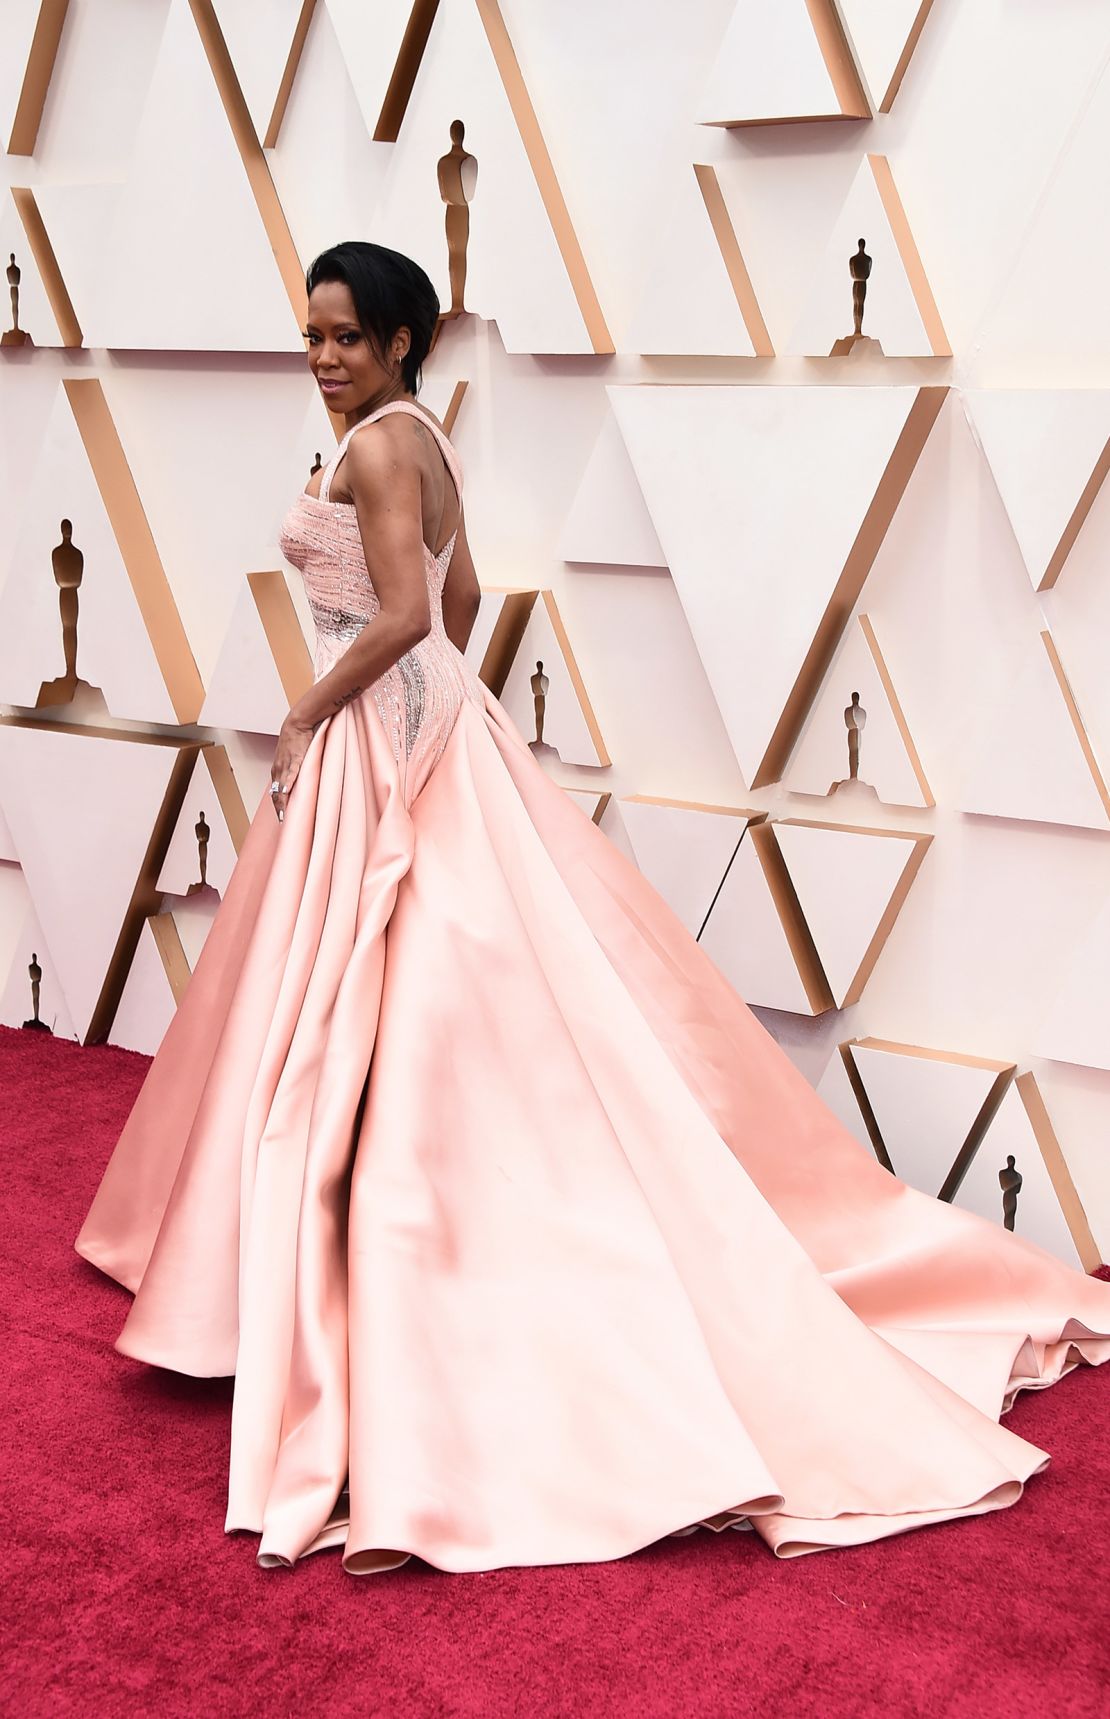 There were various shades of pink on display, from Regina King's pale pink Versace gown (pictured) to the brighter shades worn by Idina Menzel and "Parasite" actress Park So-Dam.